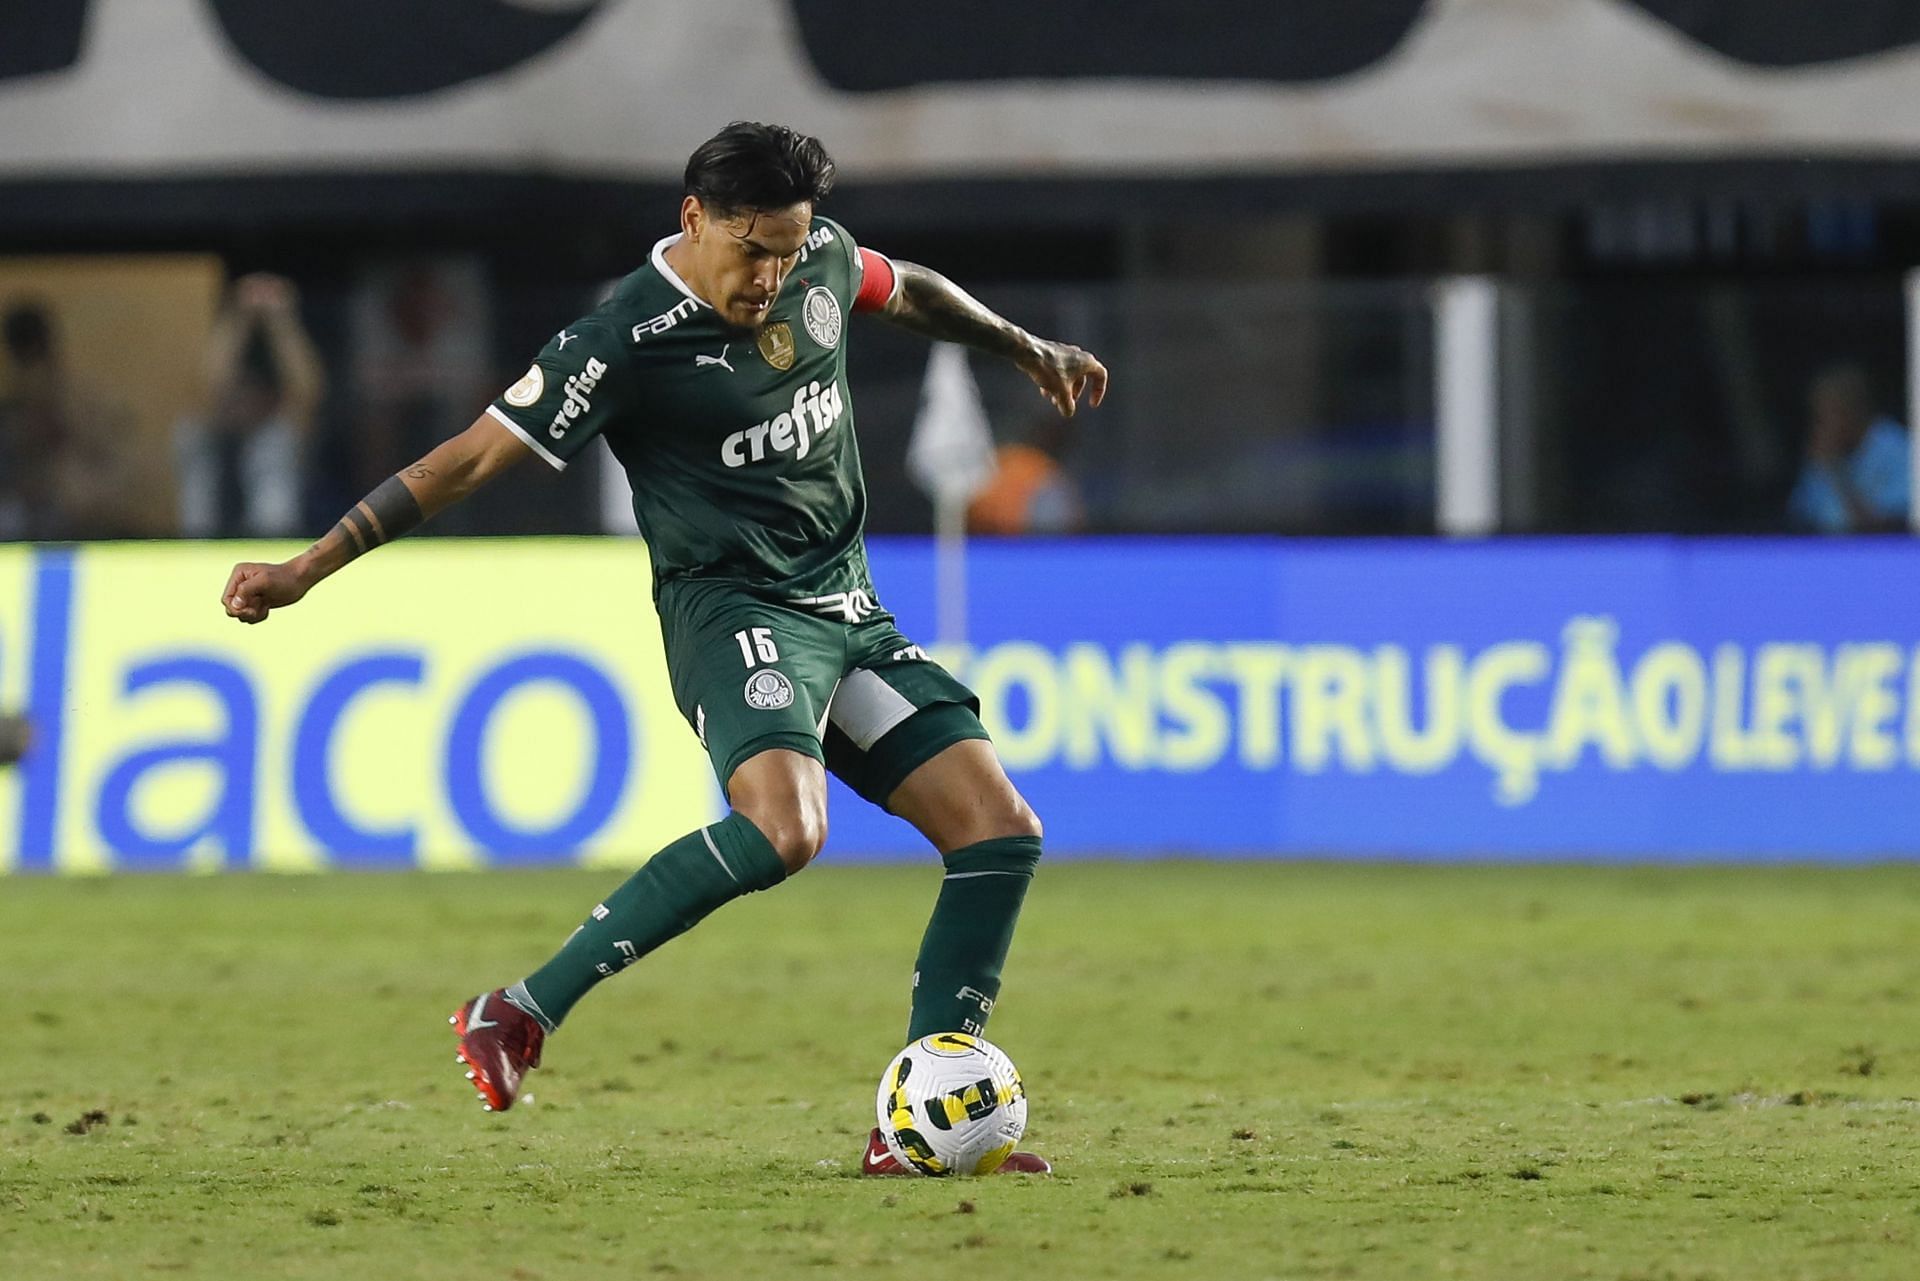 Palmeiras will be looking to make it three wins in a row in the Brazilian Serie A.